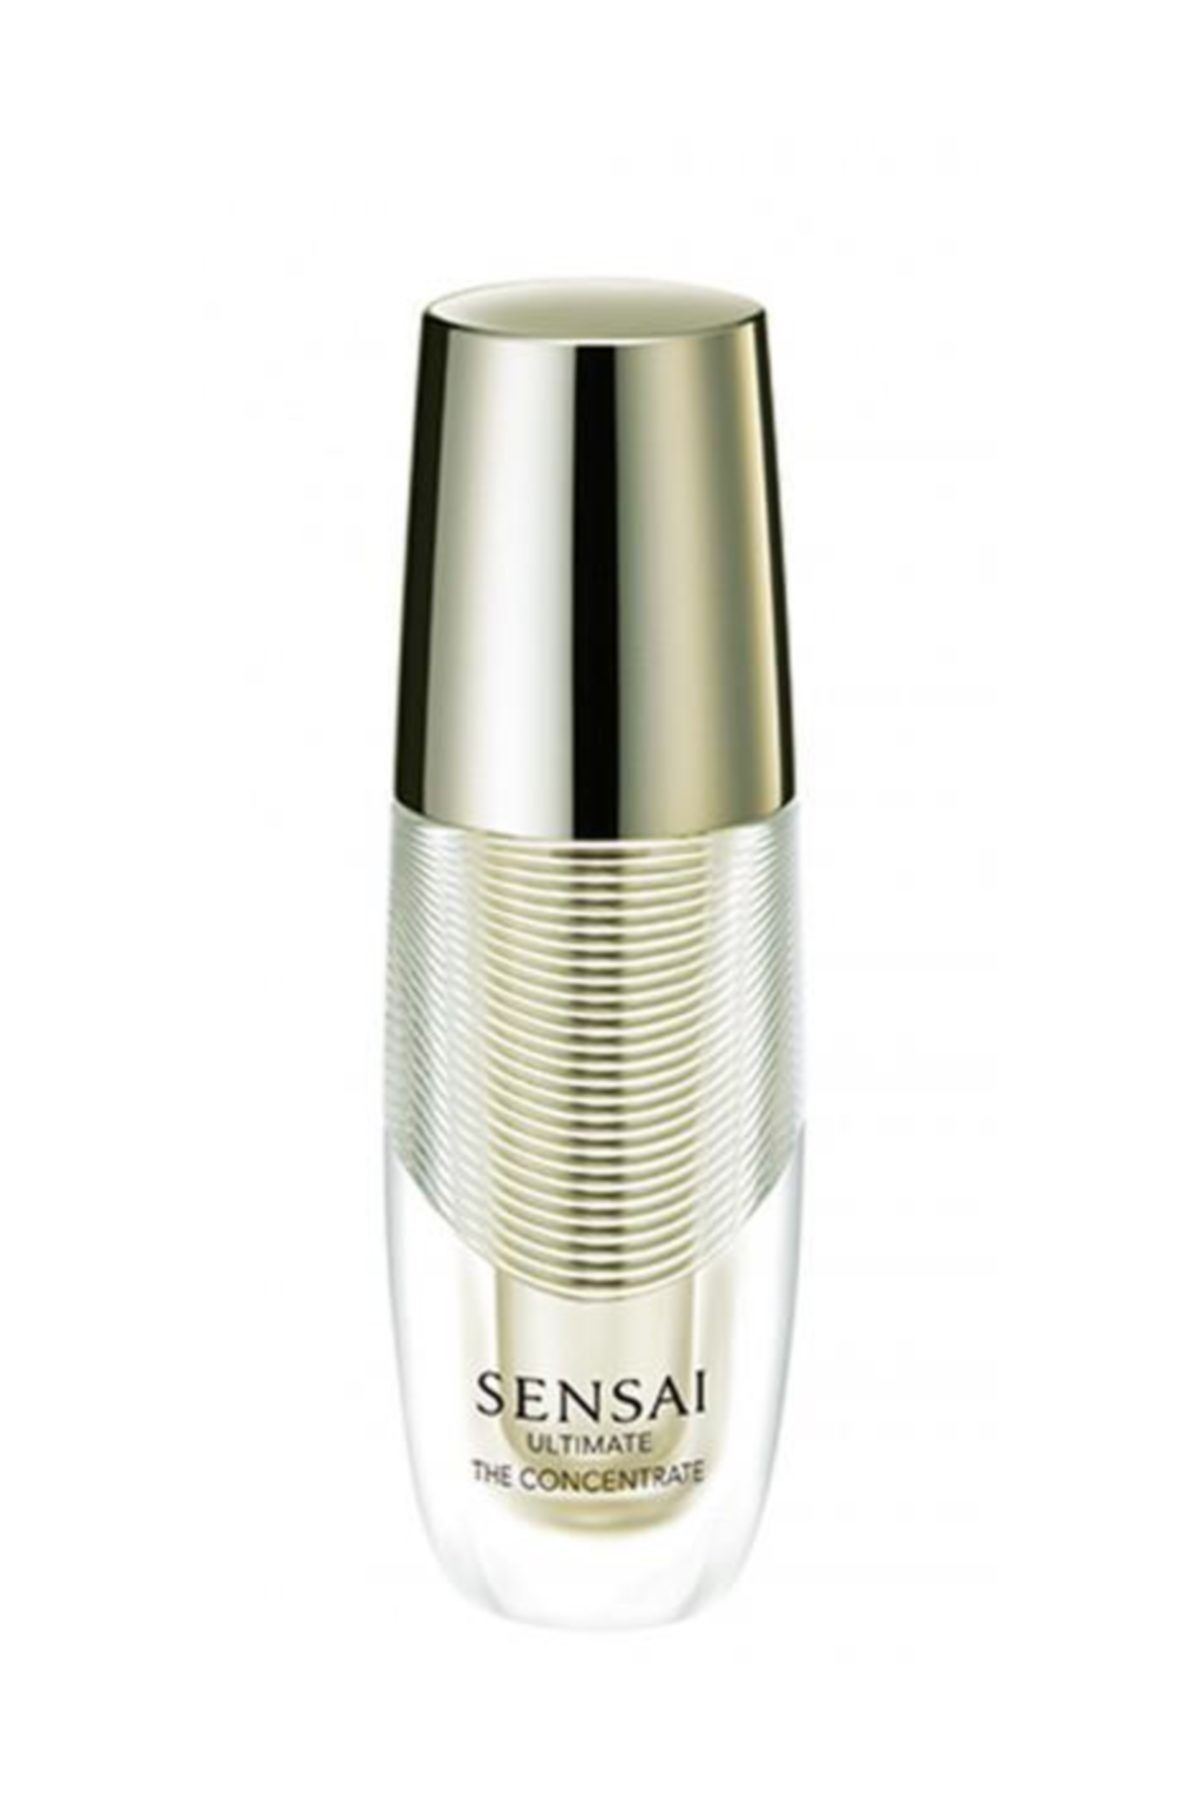 Kanebo Sensai Ultimate The Concentrate 30 ml 4973167909263